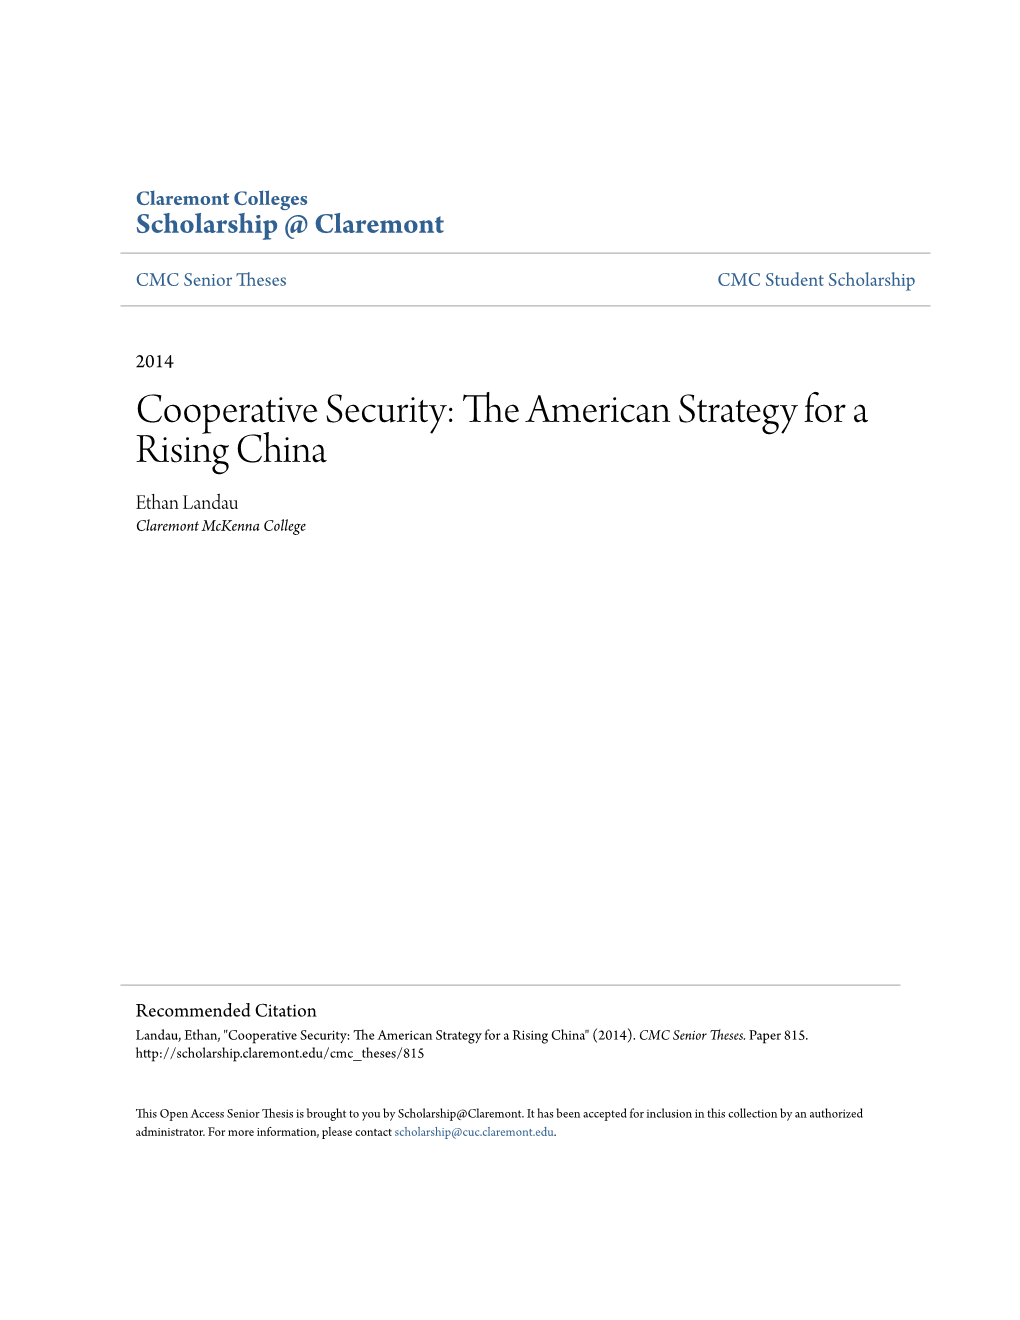 Cooperative Security: the American Strategy for a Rising China Ethan Landau Claremont Mckenna College